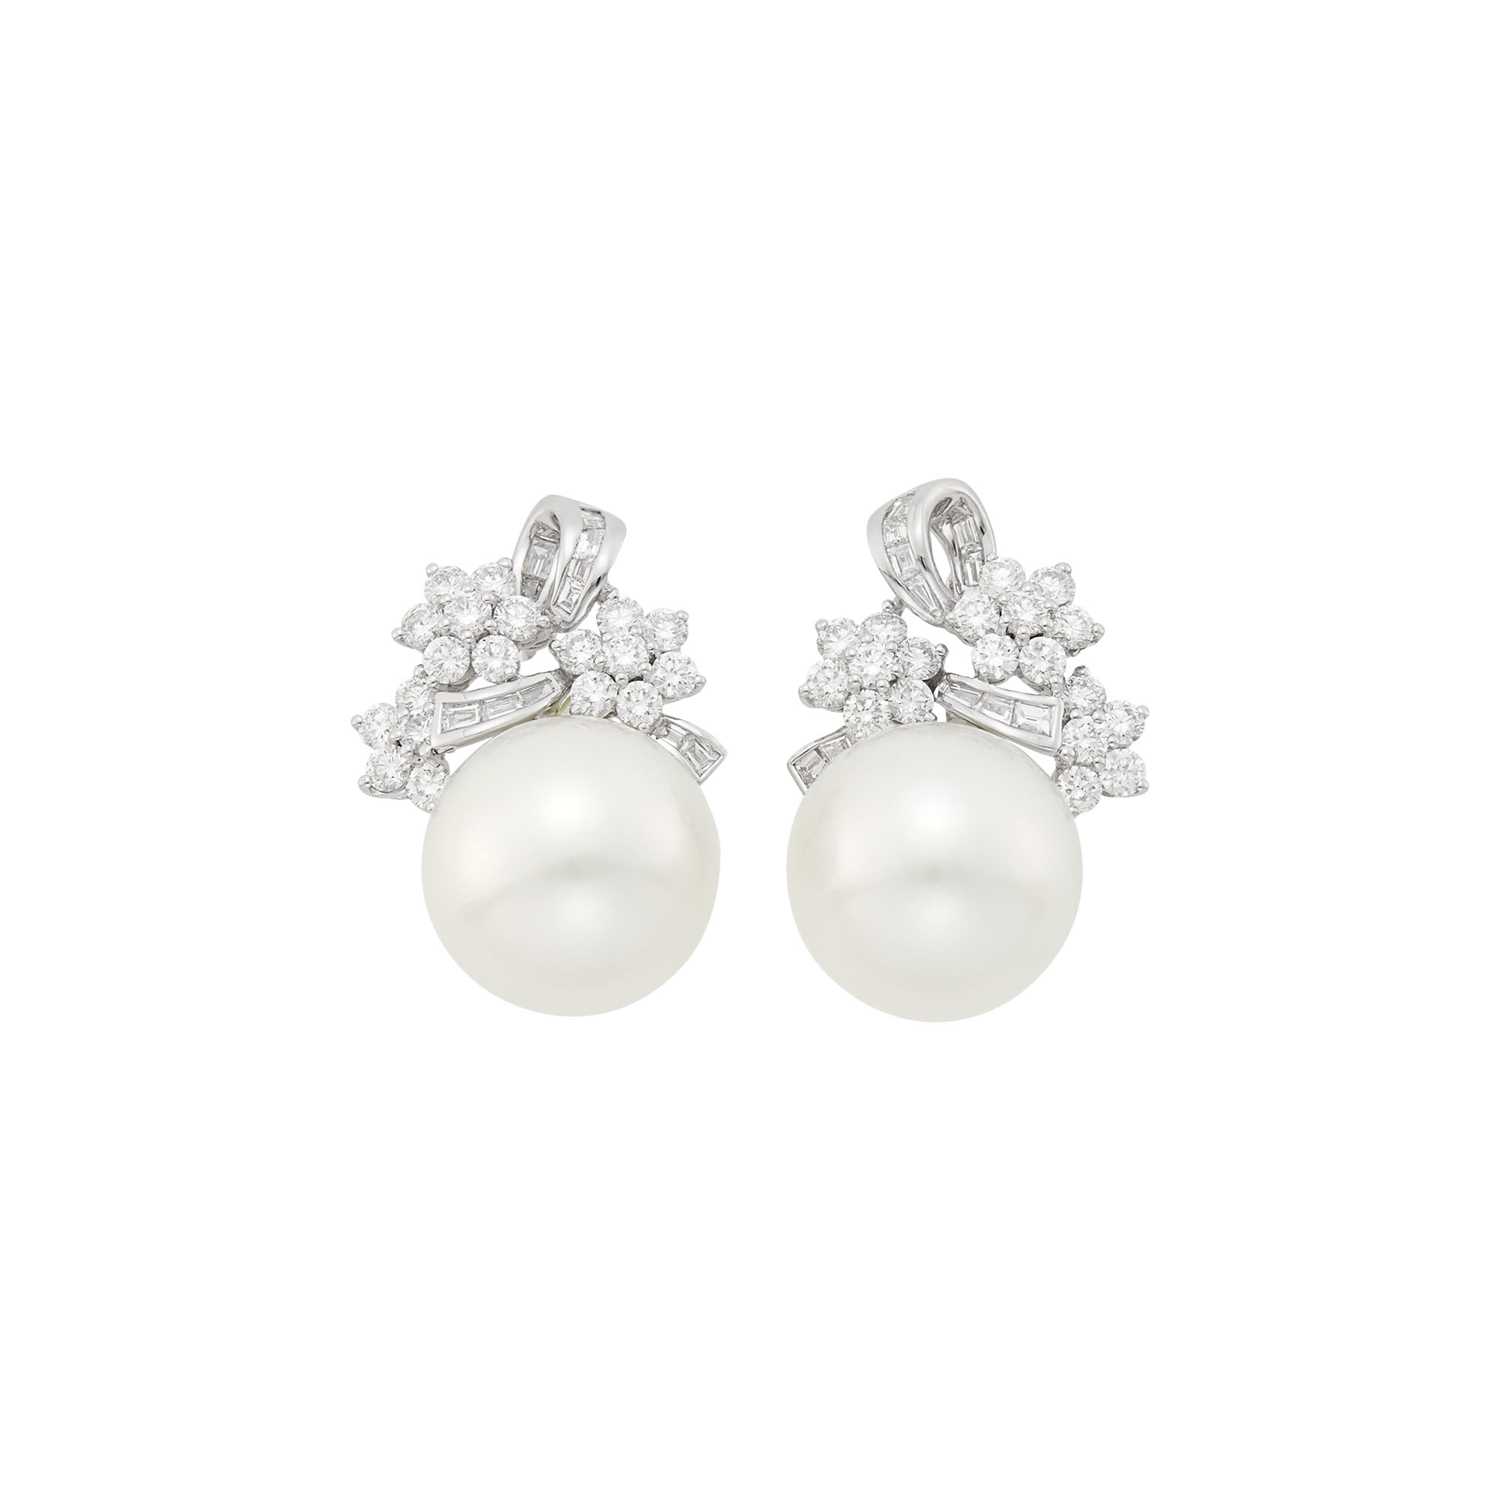 Lot 97 - Pair of White Gold, South Sea Cultured Pearl and Diamond Earrings